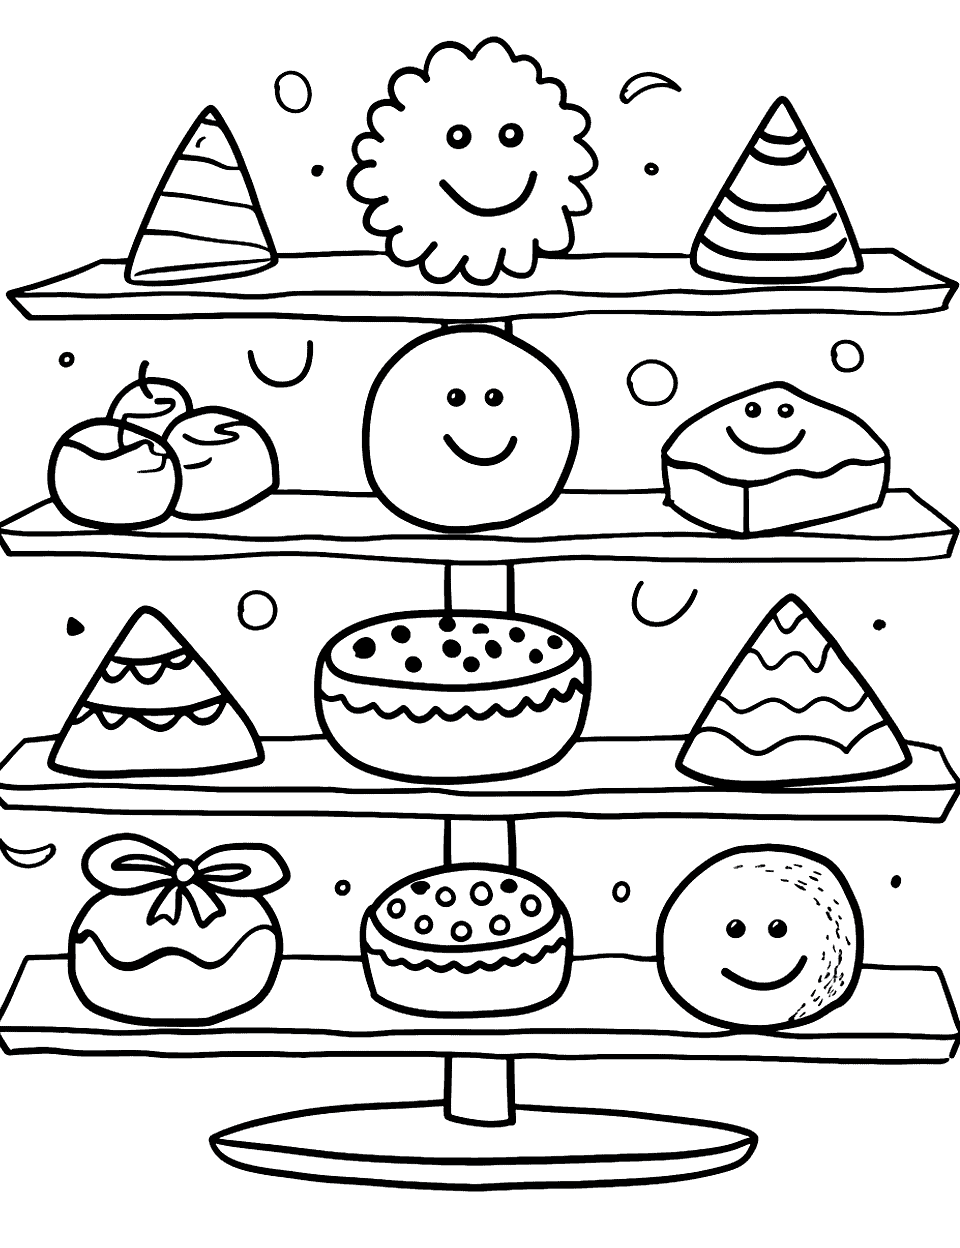 Basic Shapes Bakery Coloring Page - Cookies and cakes on display, each shaped like a different basic shape.